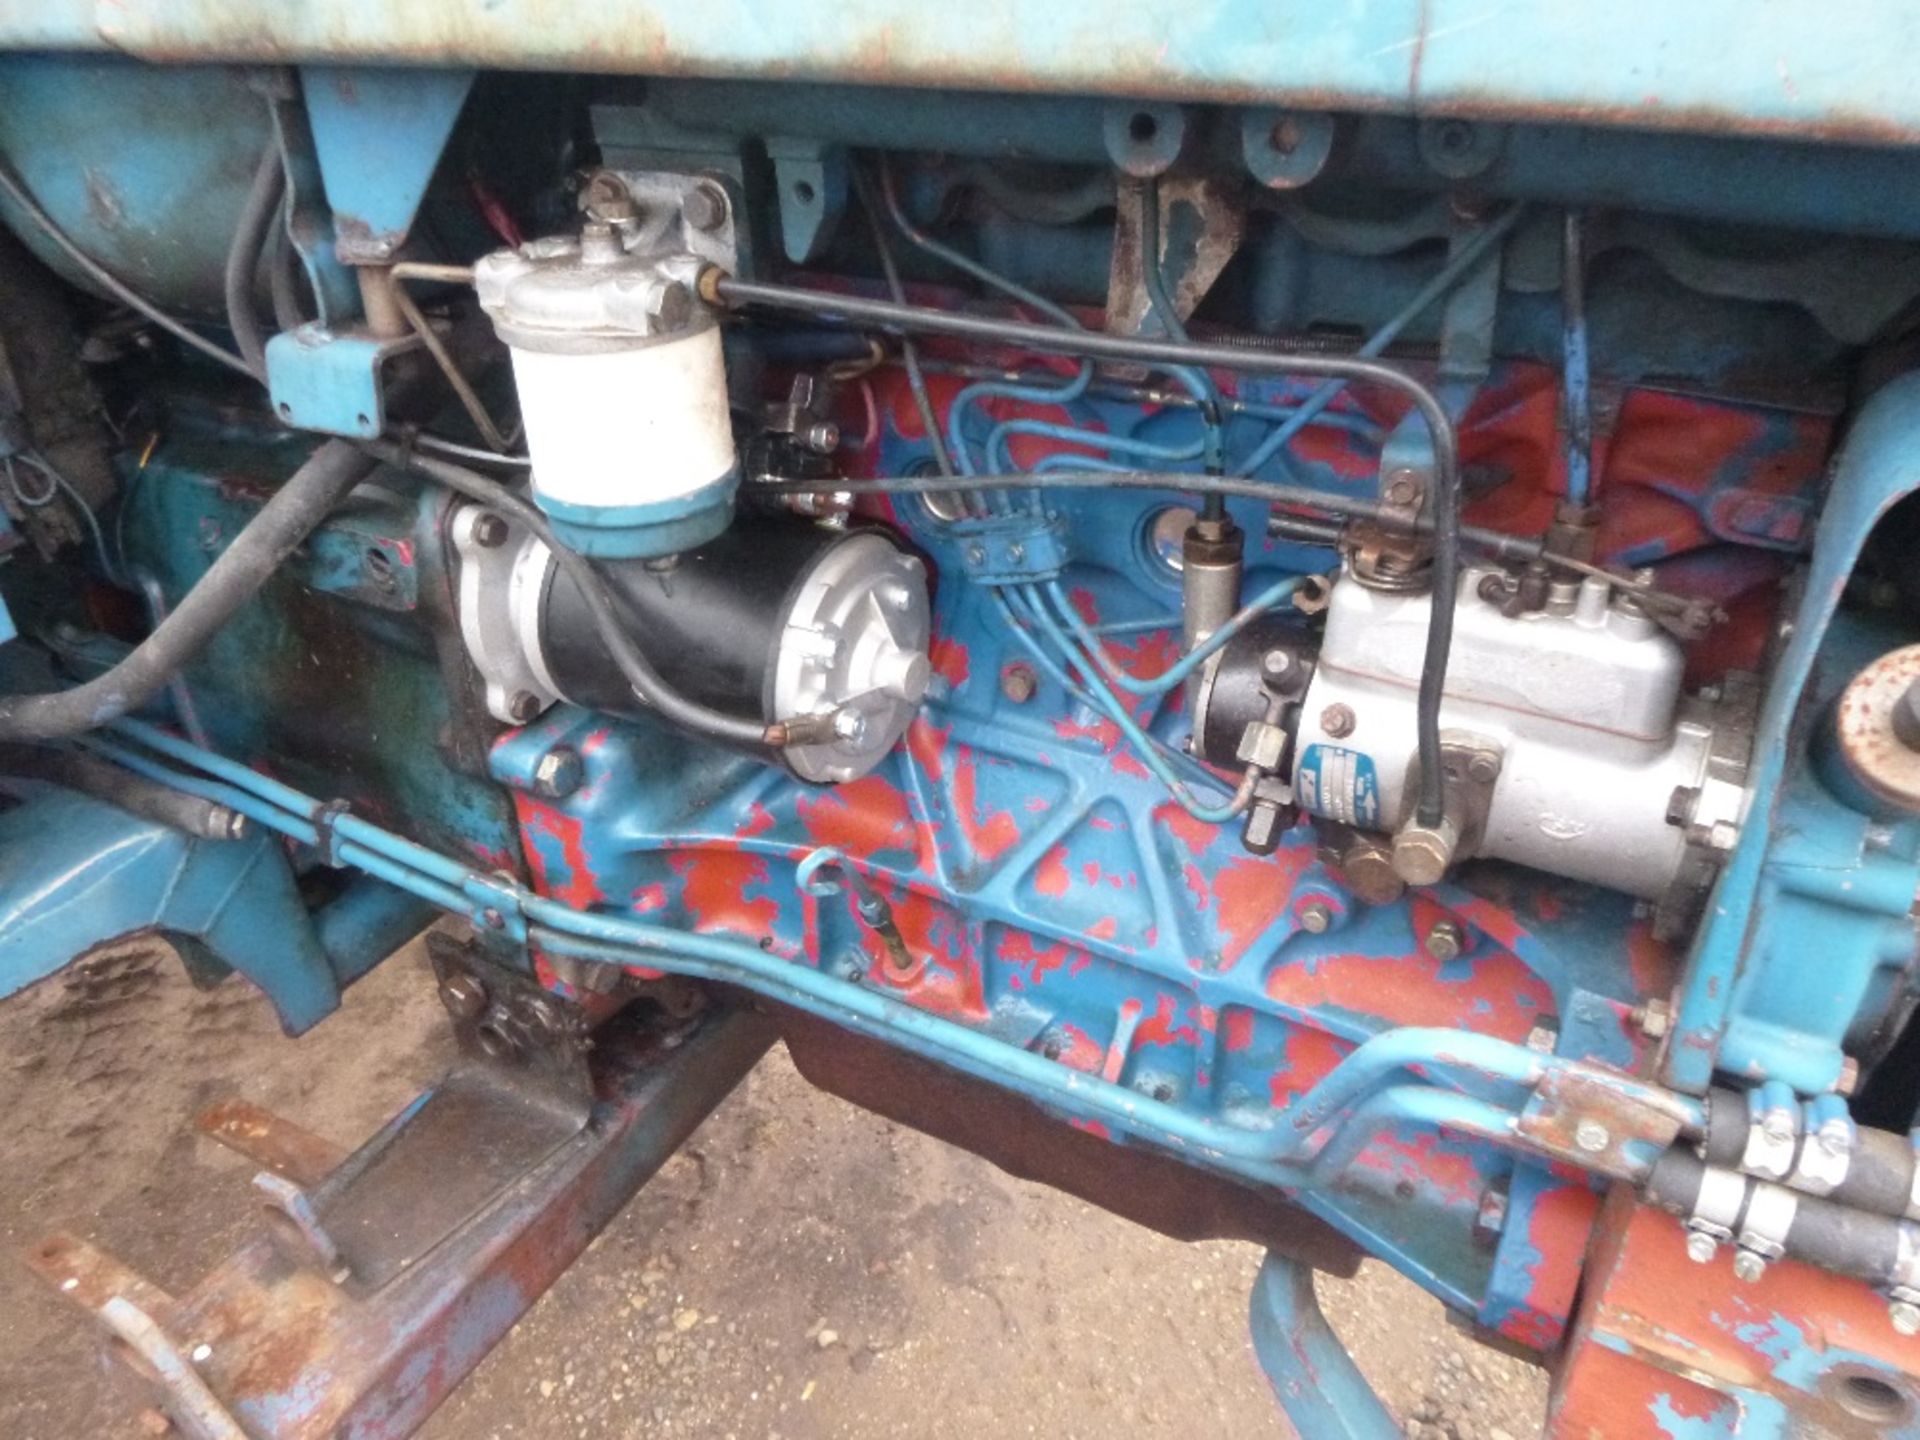 Ford 5610 2wd Tractor with Floor Change Gearbox. Reg. No. B621 UOW Ser. No. BA22021 - Image 4 of 13